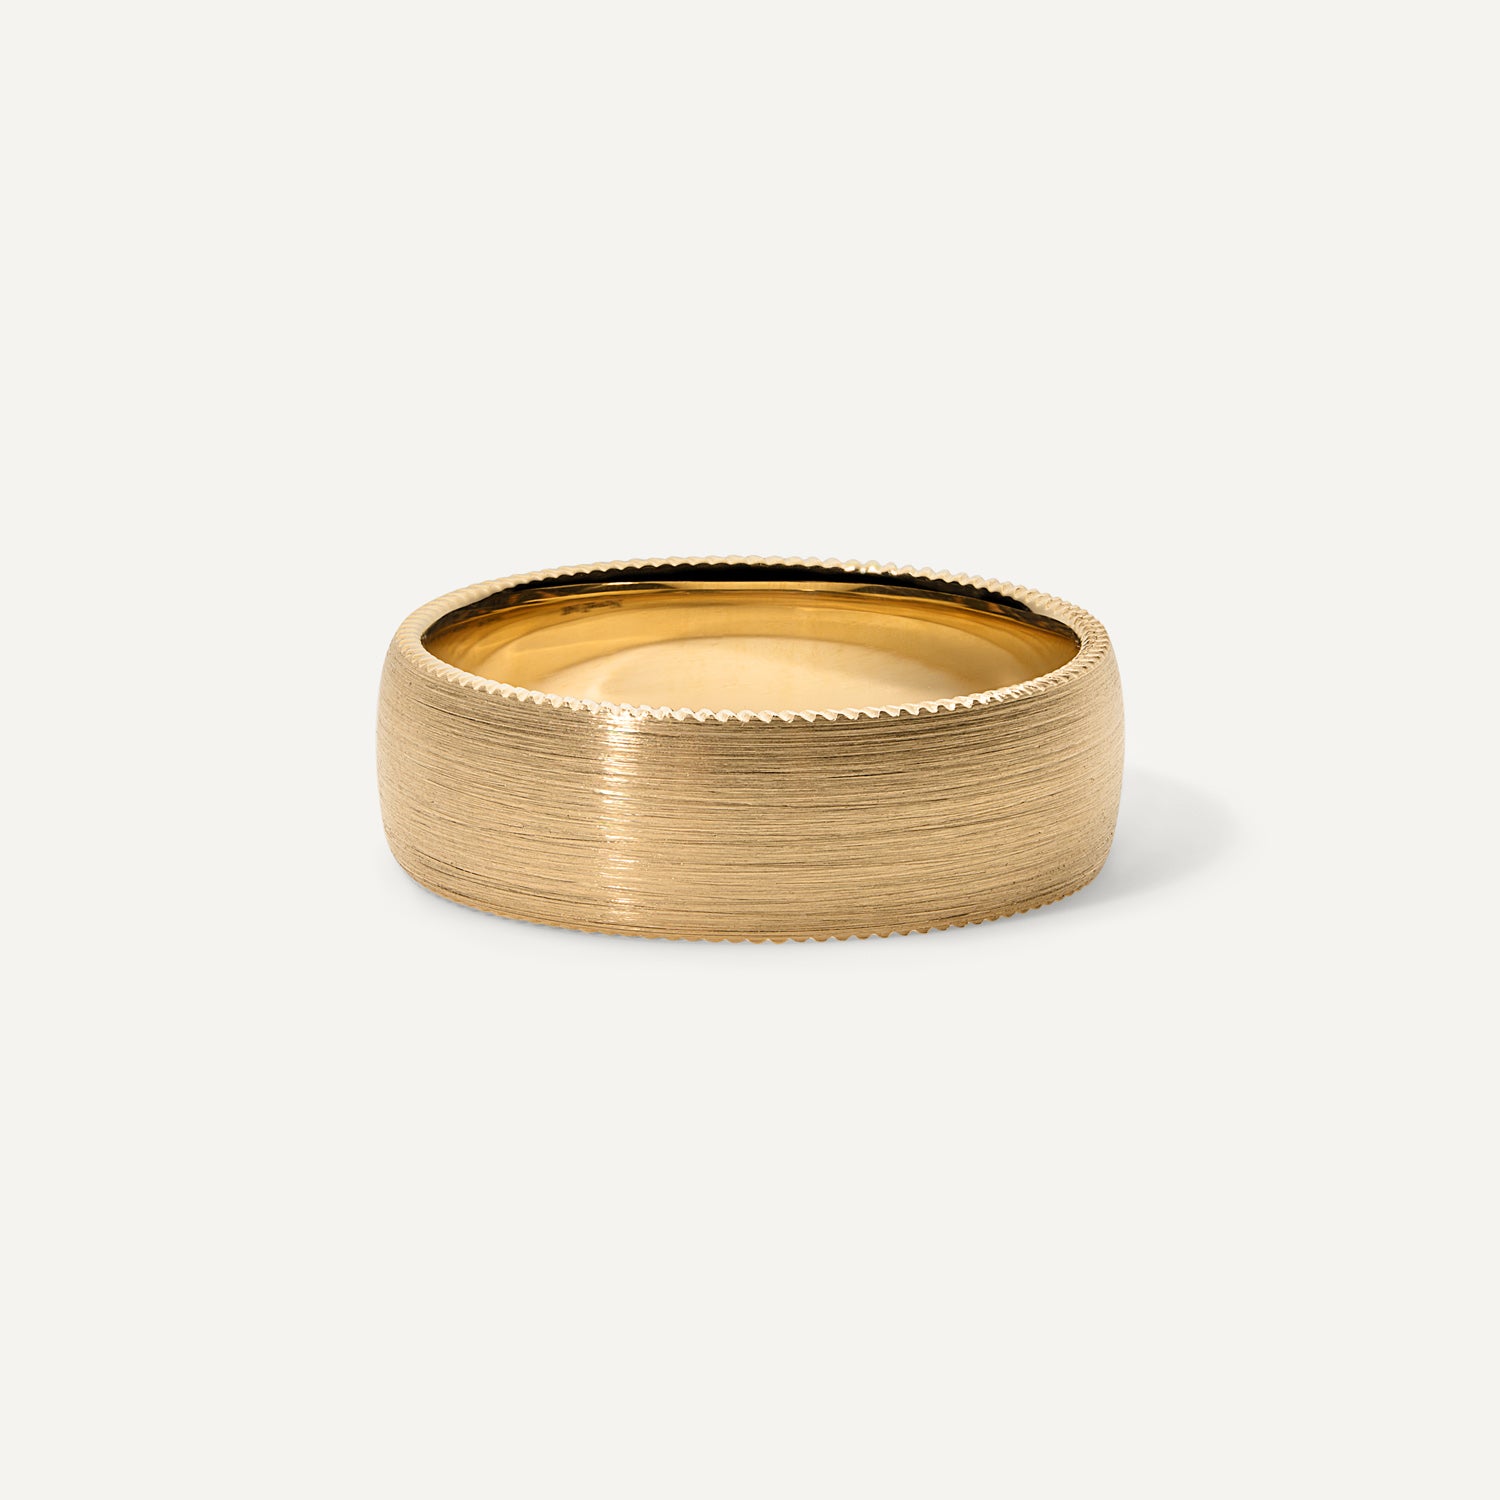 7mm Brushed Band with Rope Edge-14k Yellow Gold